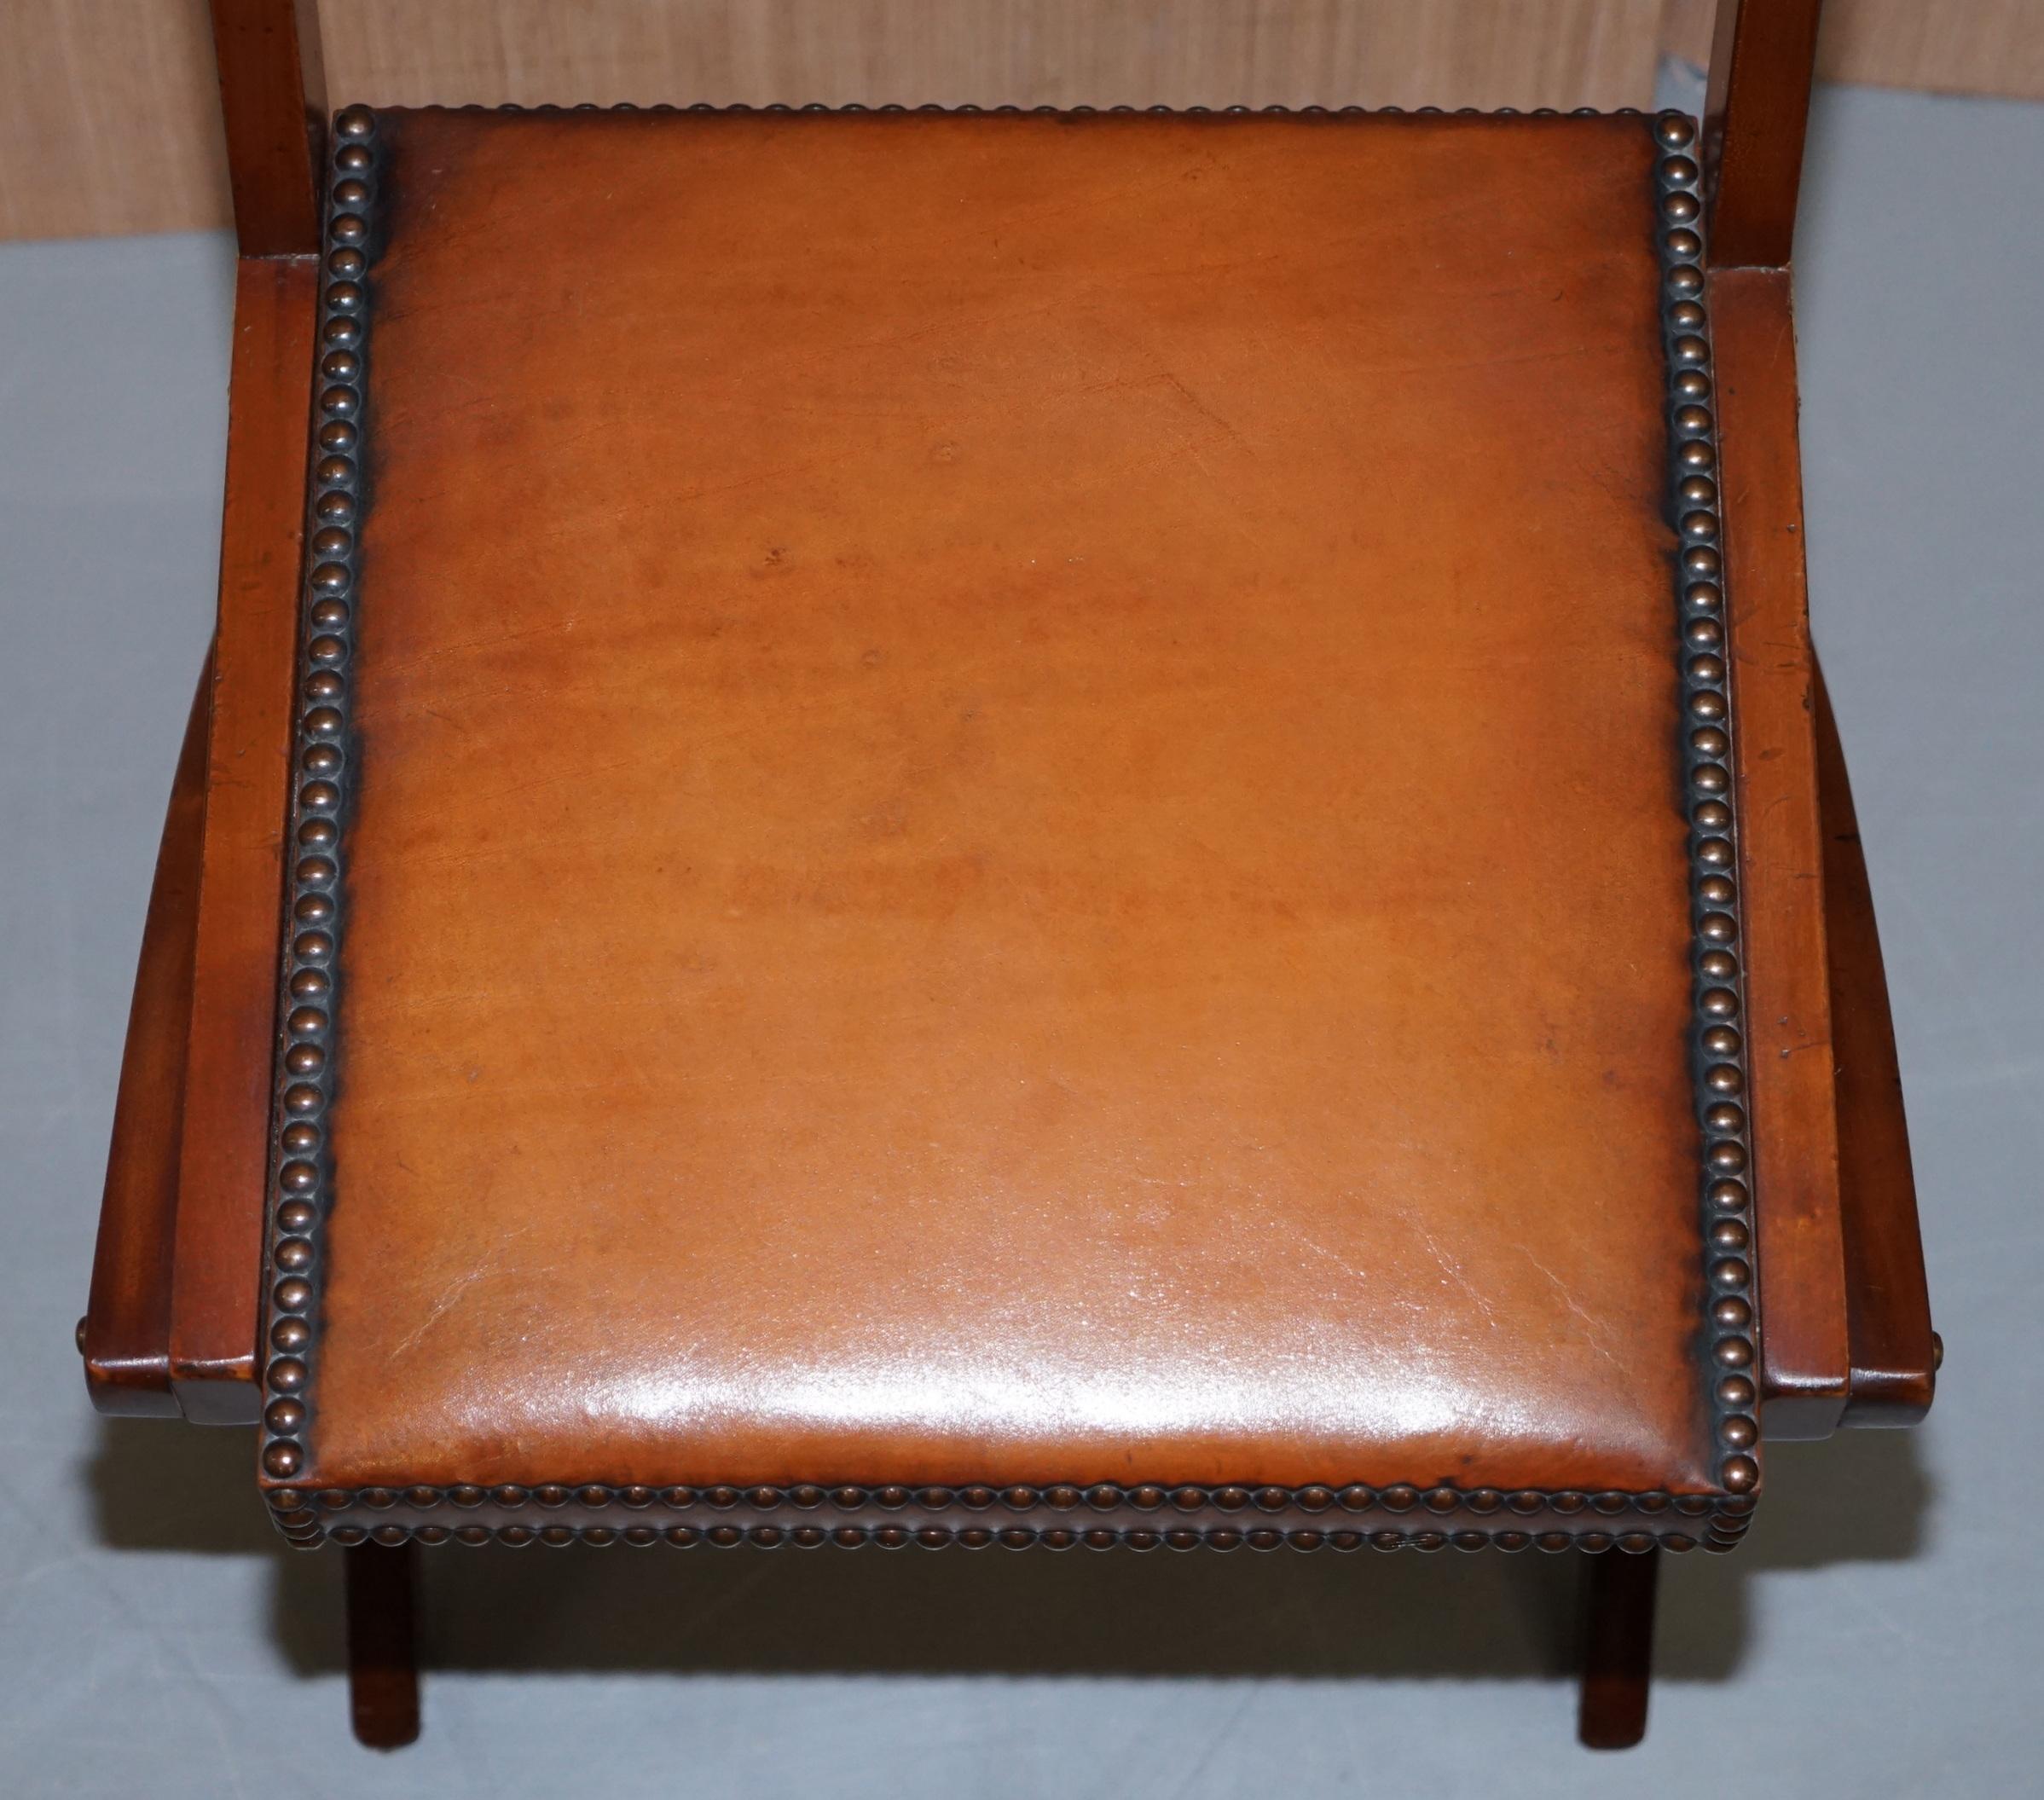 English Stunning Brown Leather Kennedy Furniture Harrods Military Campaign Desk Chair